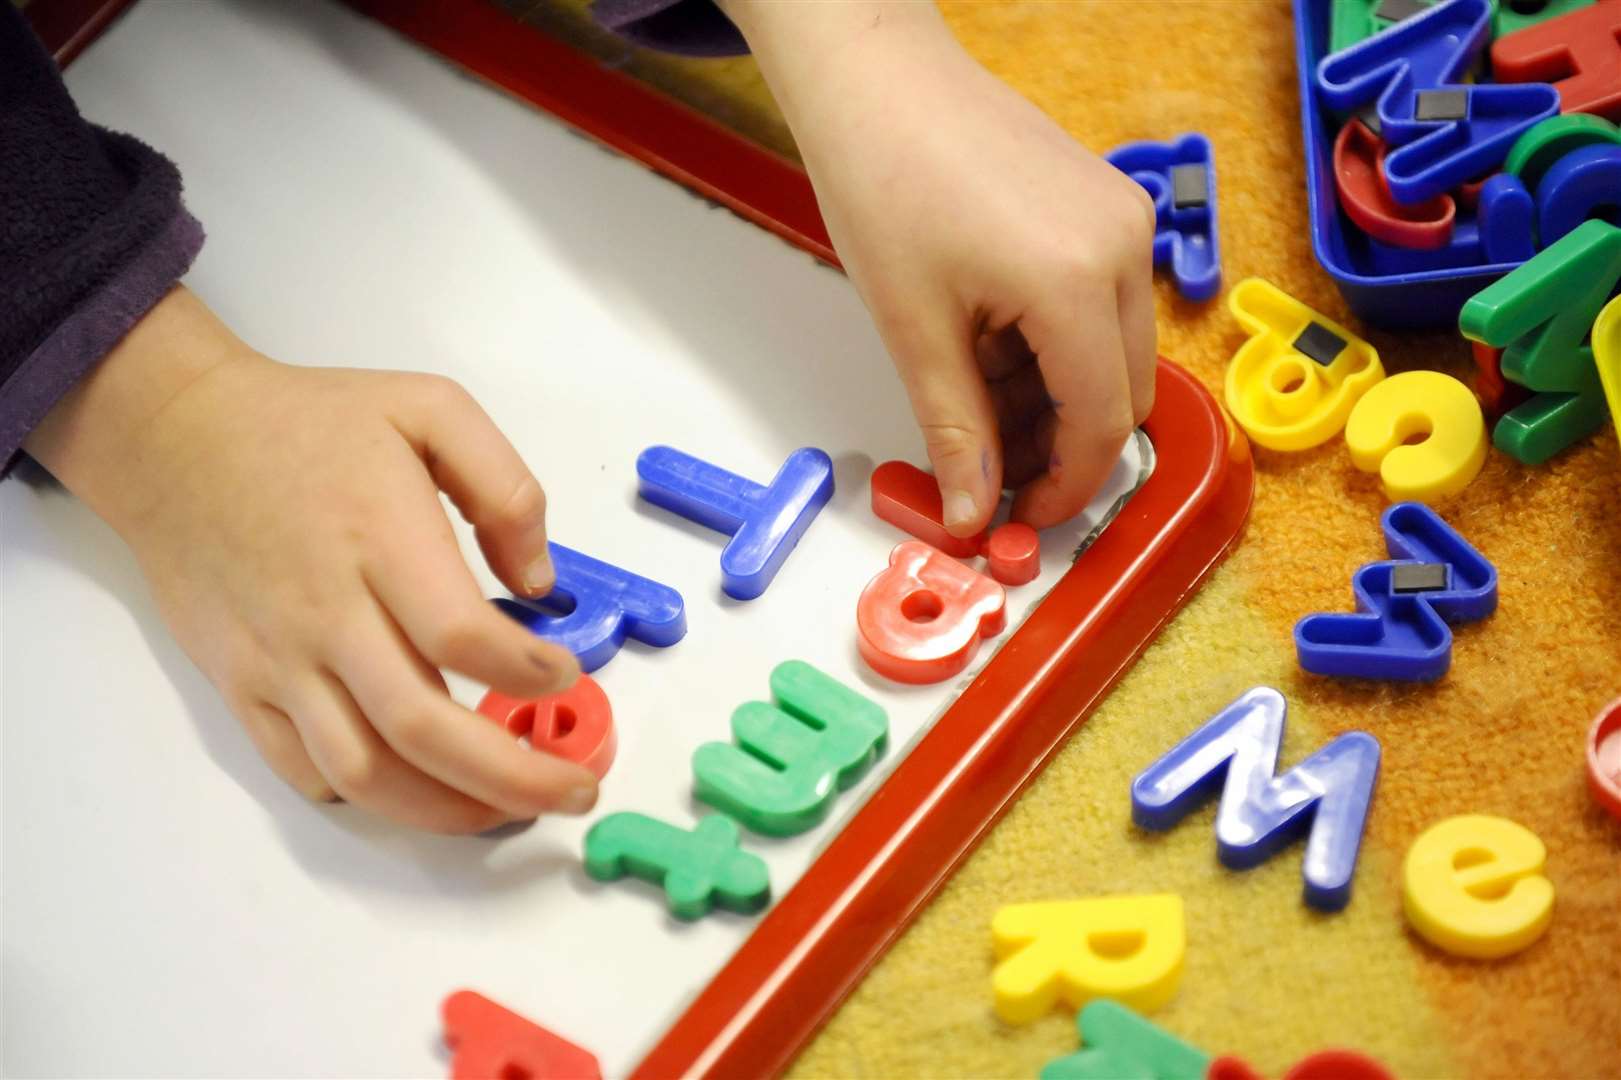 The Chatham-based pre-school is waiting for another visit from Ofsted. Stock image: Dominic Lipinski/PA